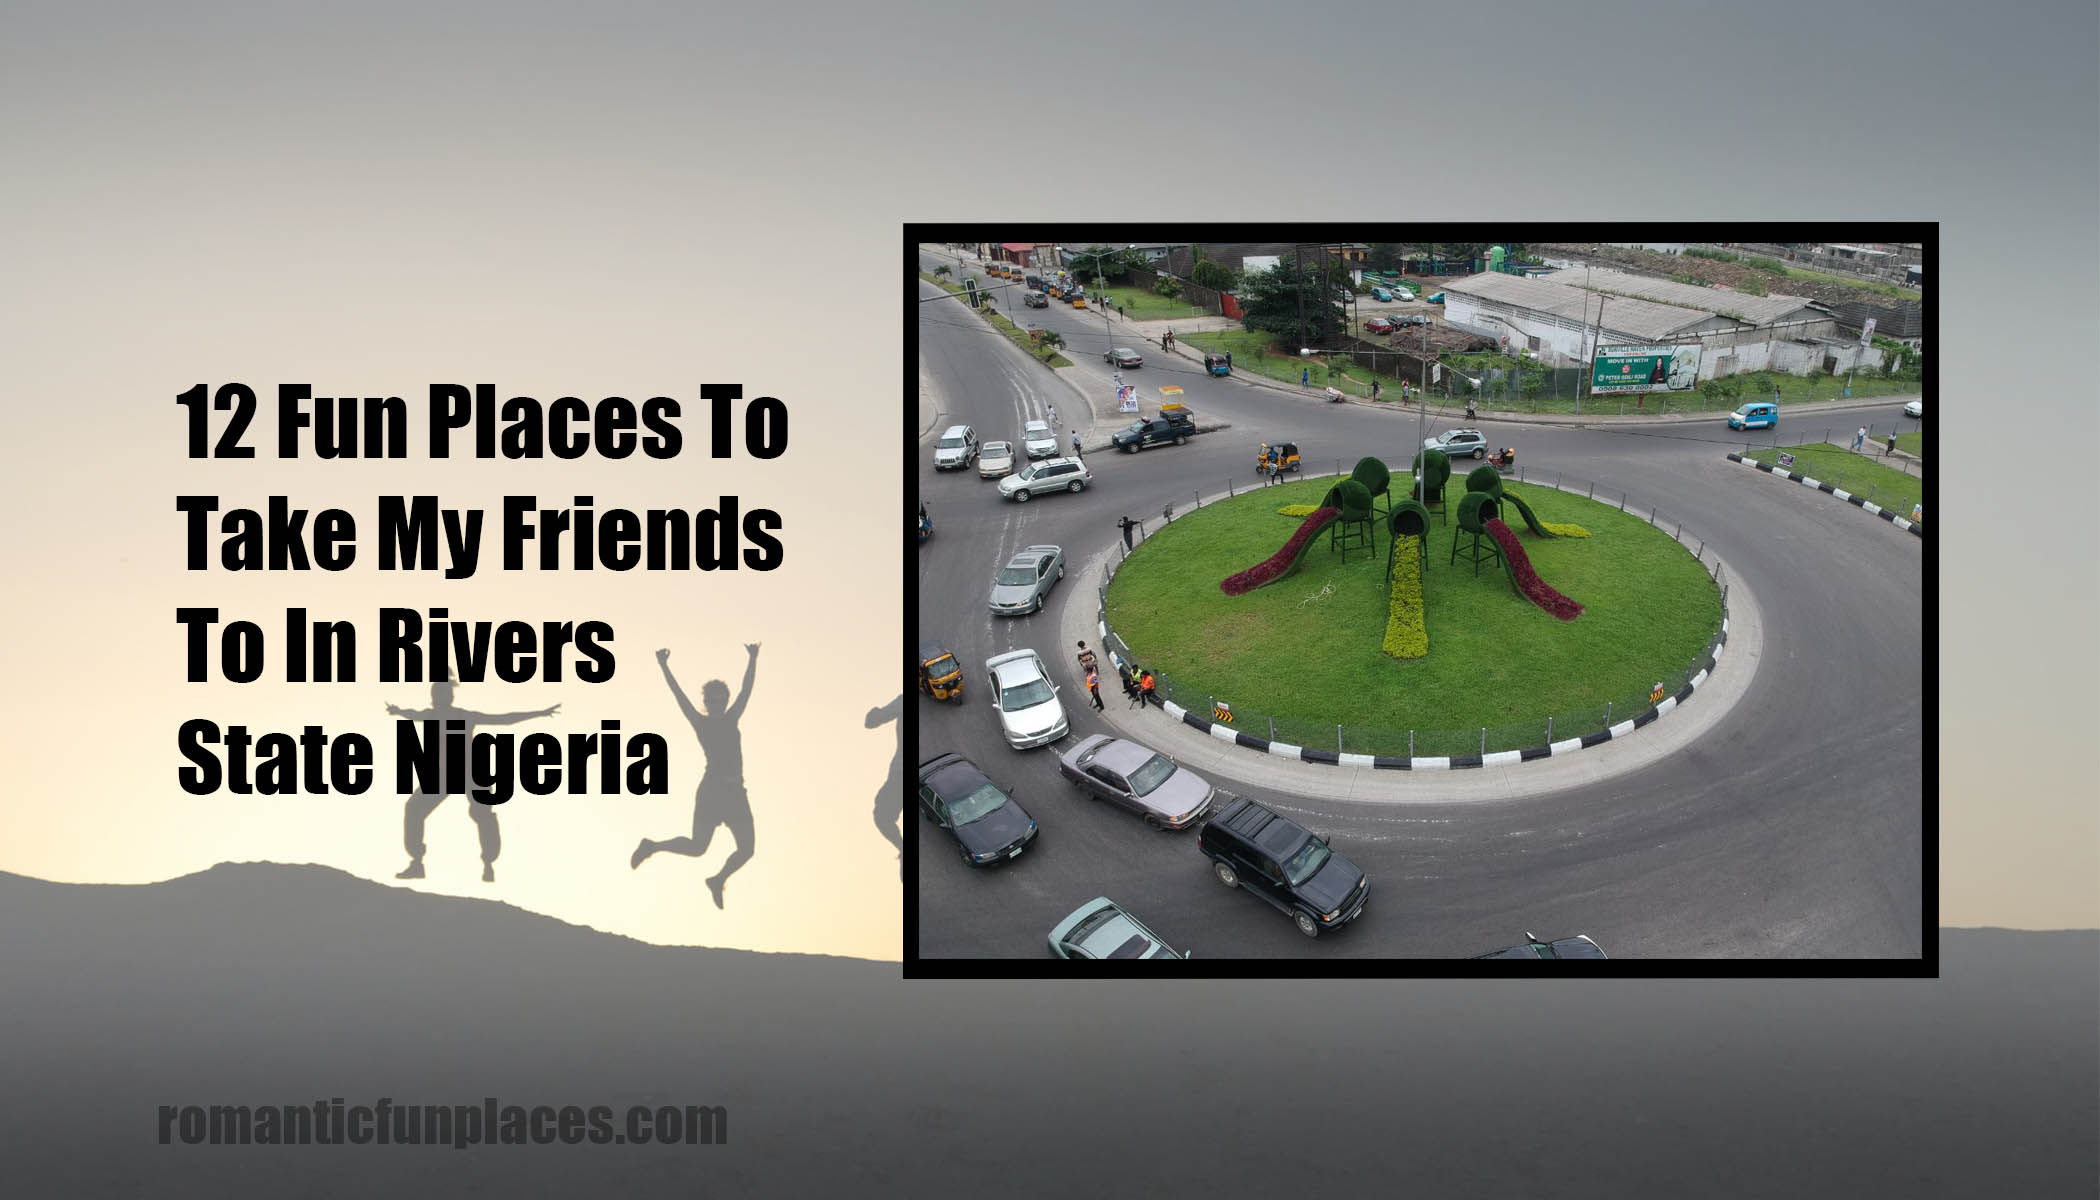 12 Fun Places To Take My Friends To In Rivers State Nigeria